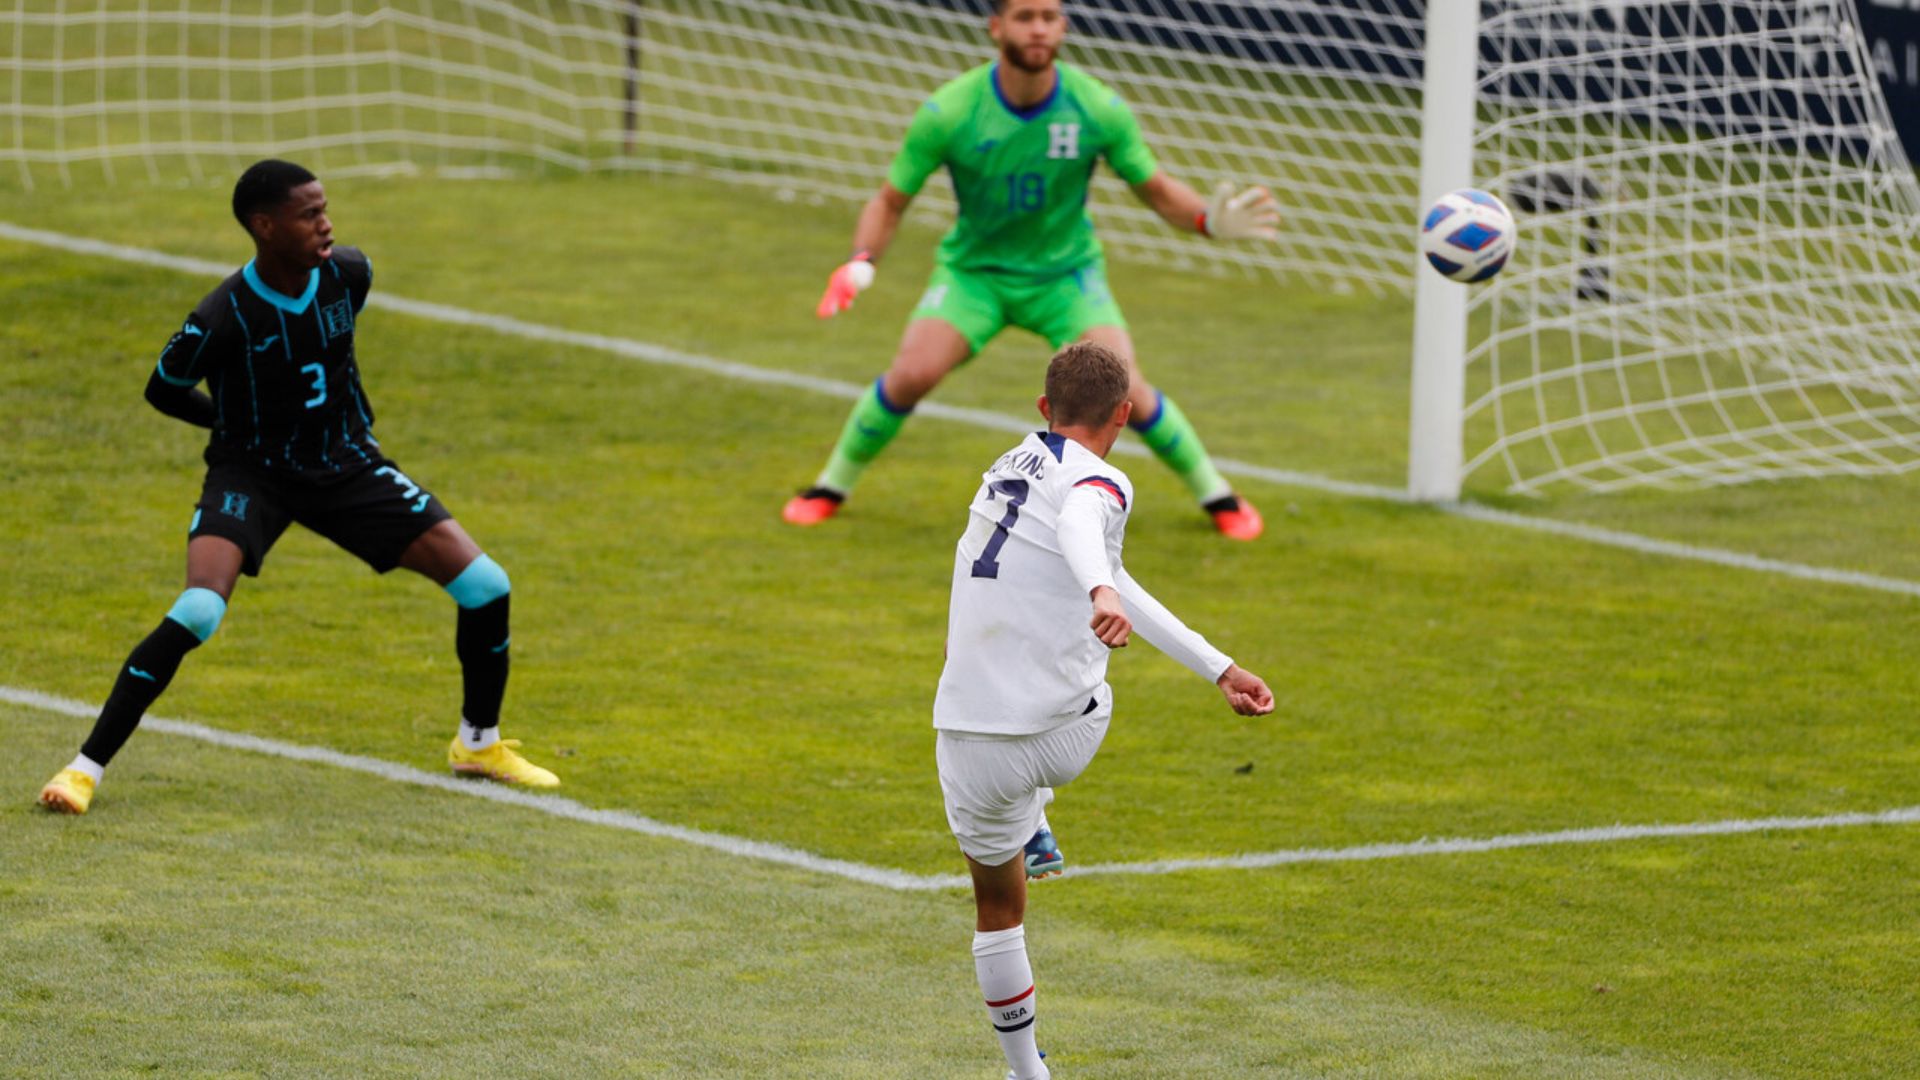 United States Secures First Football Victory in Last-Minute Over Honduras